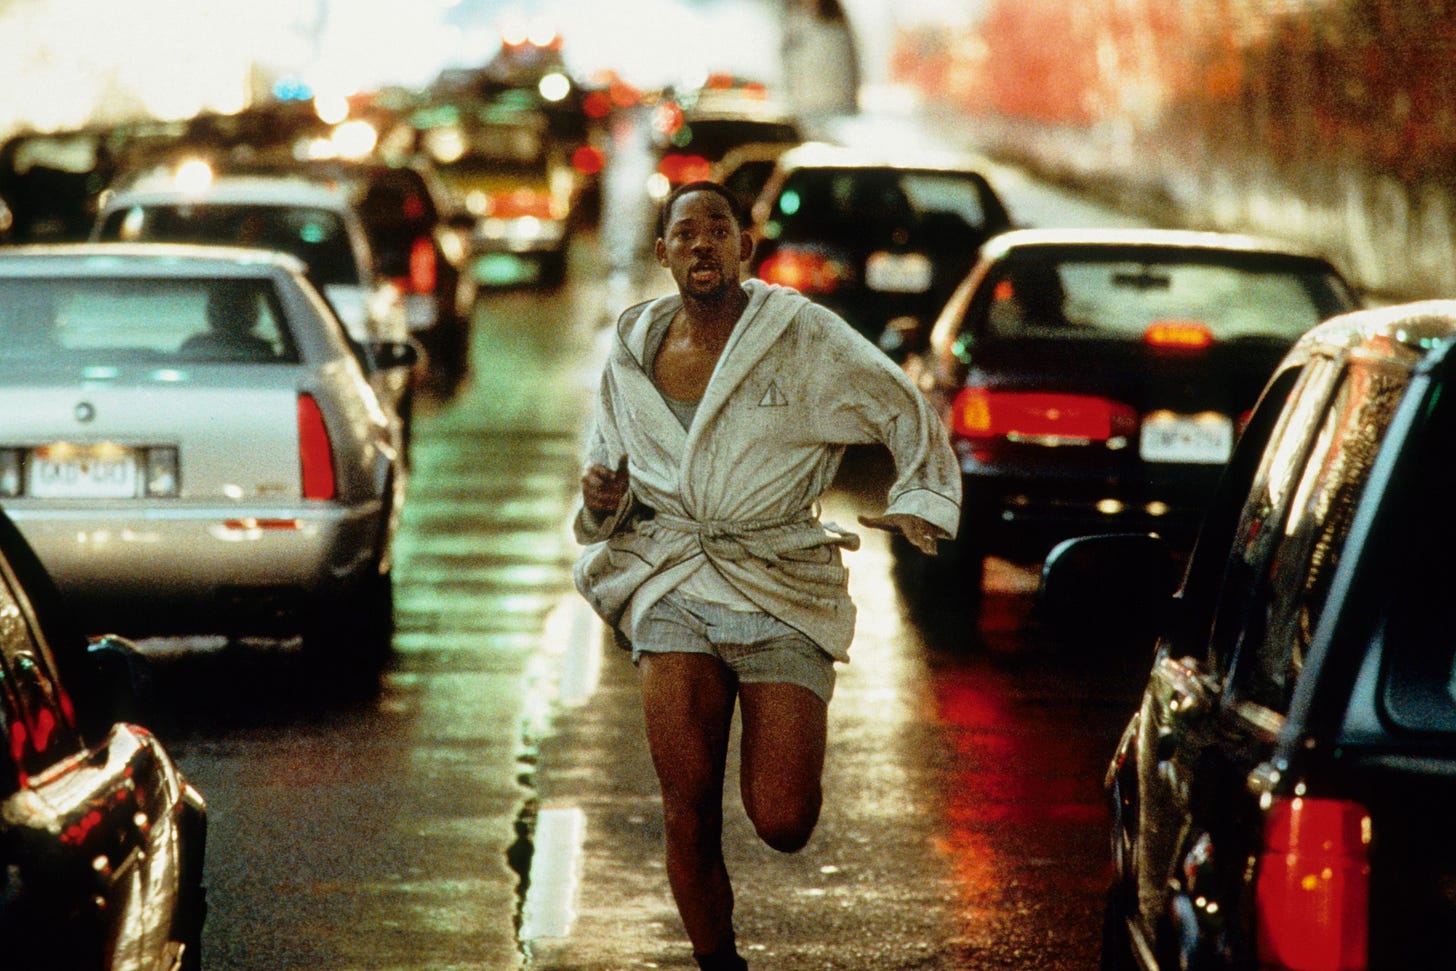 Will Smith running down the highway in his bathrobe in "Enemy of the State" (1998)